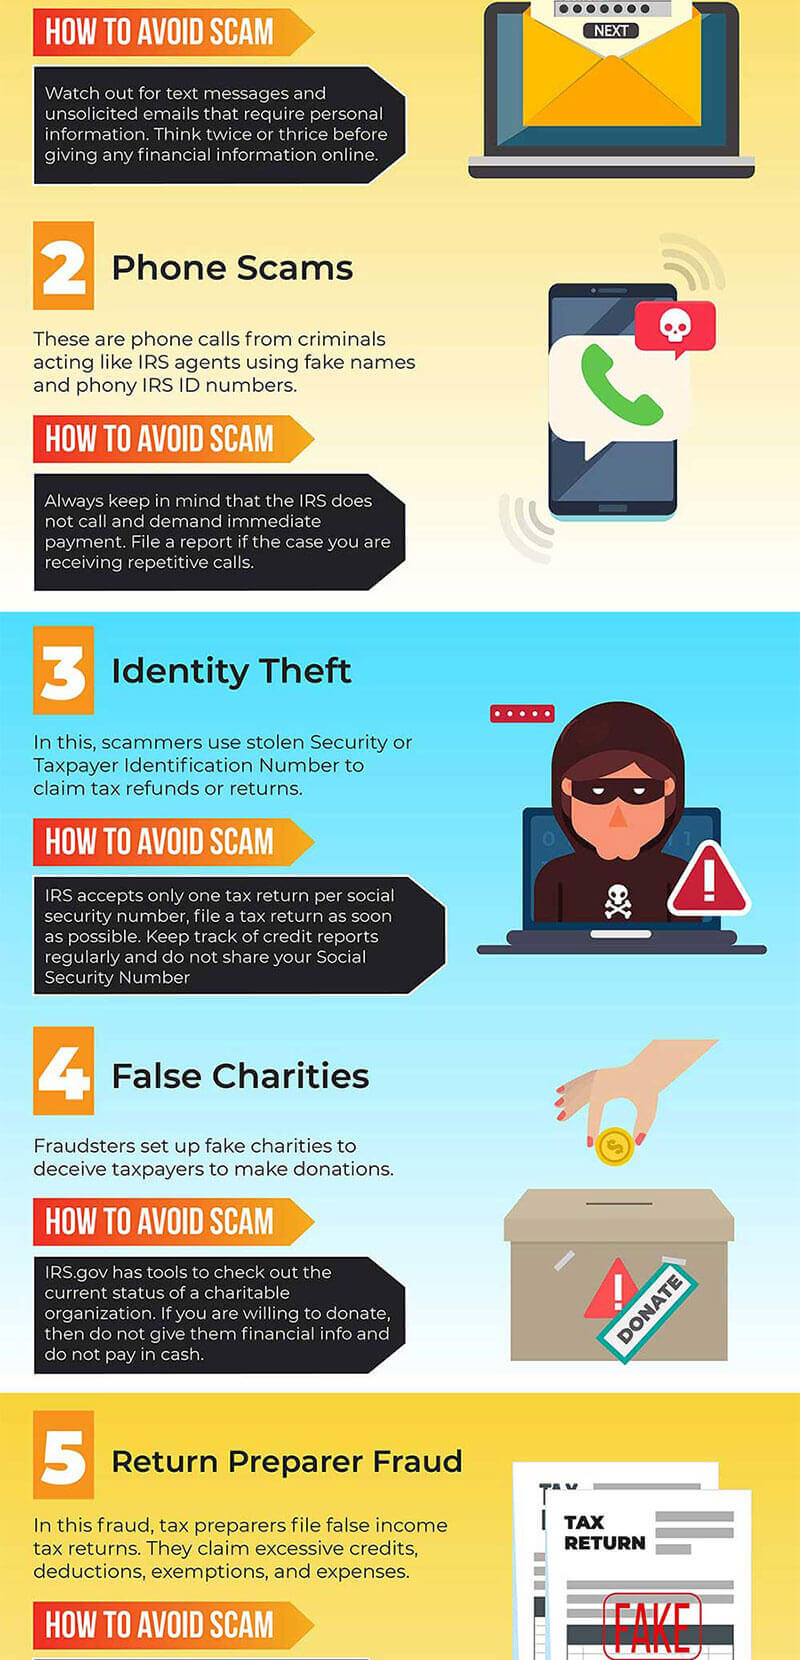 infographic-tax-scam-in-tax-season